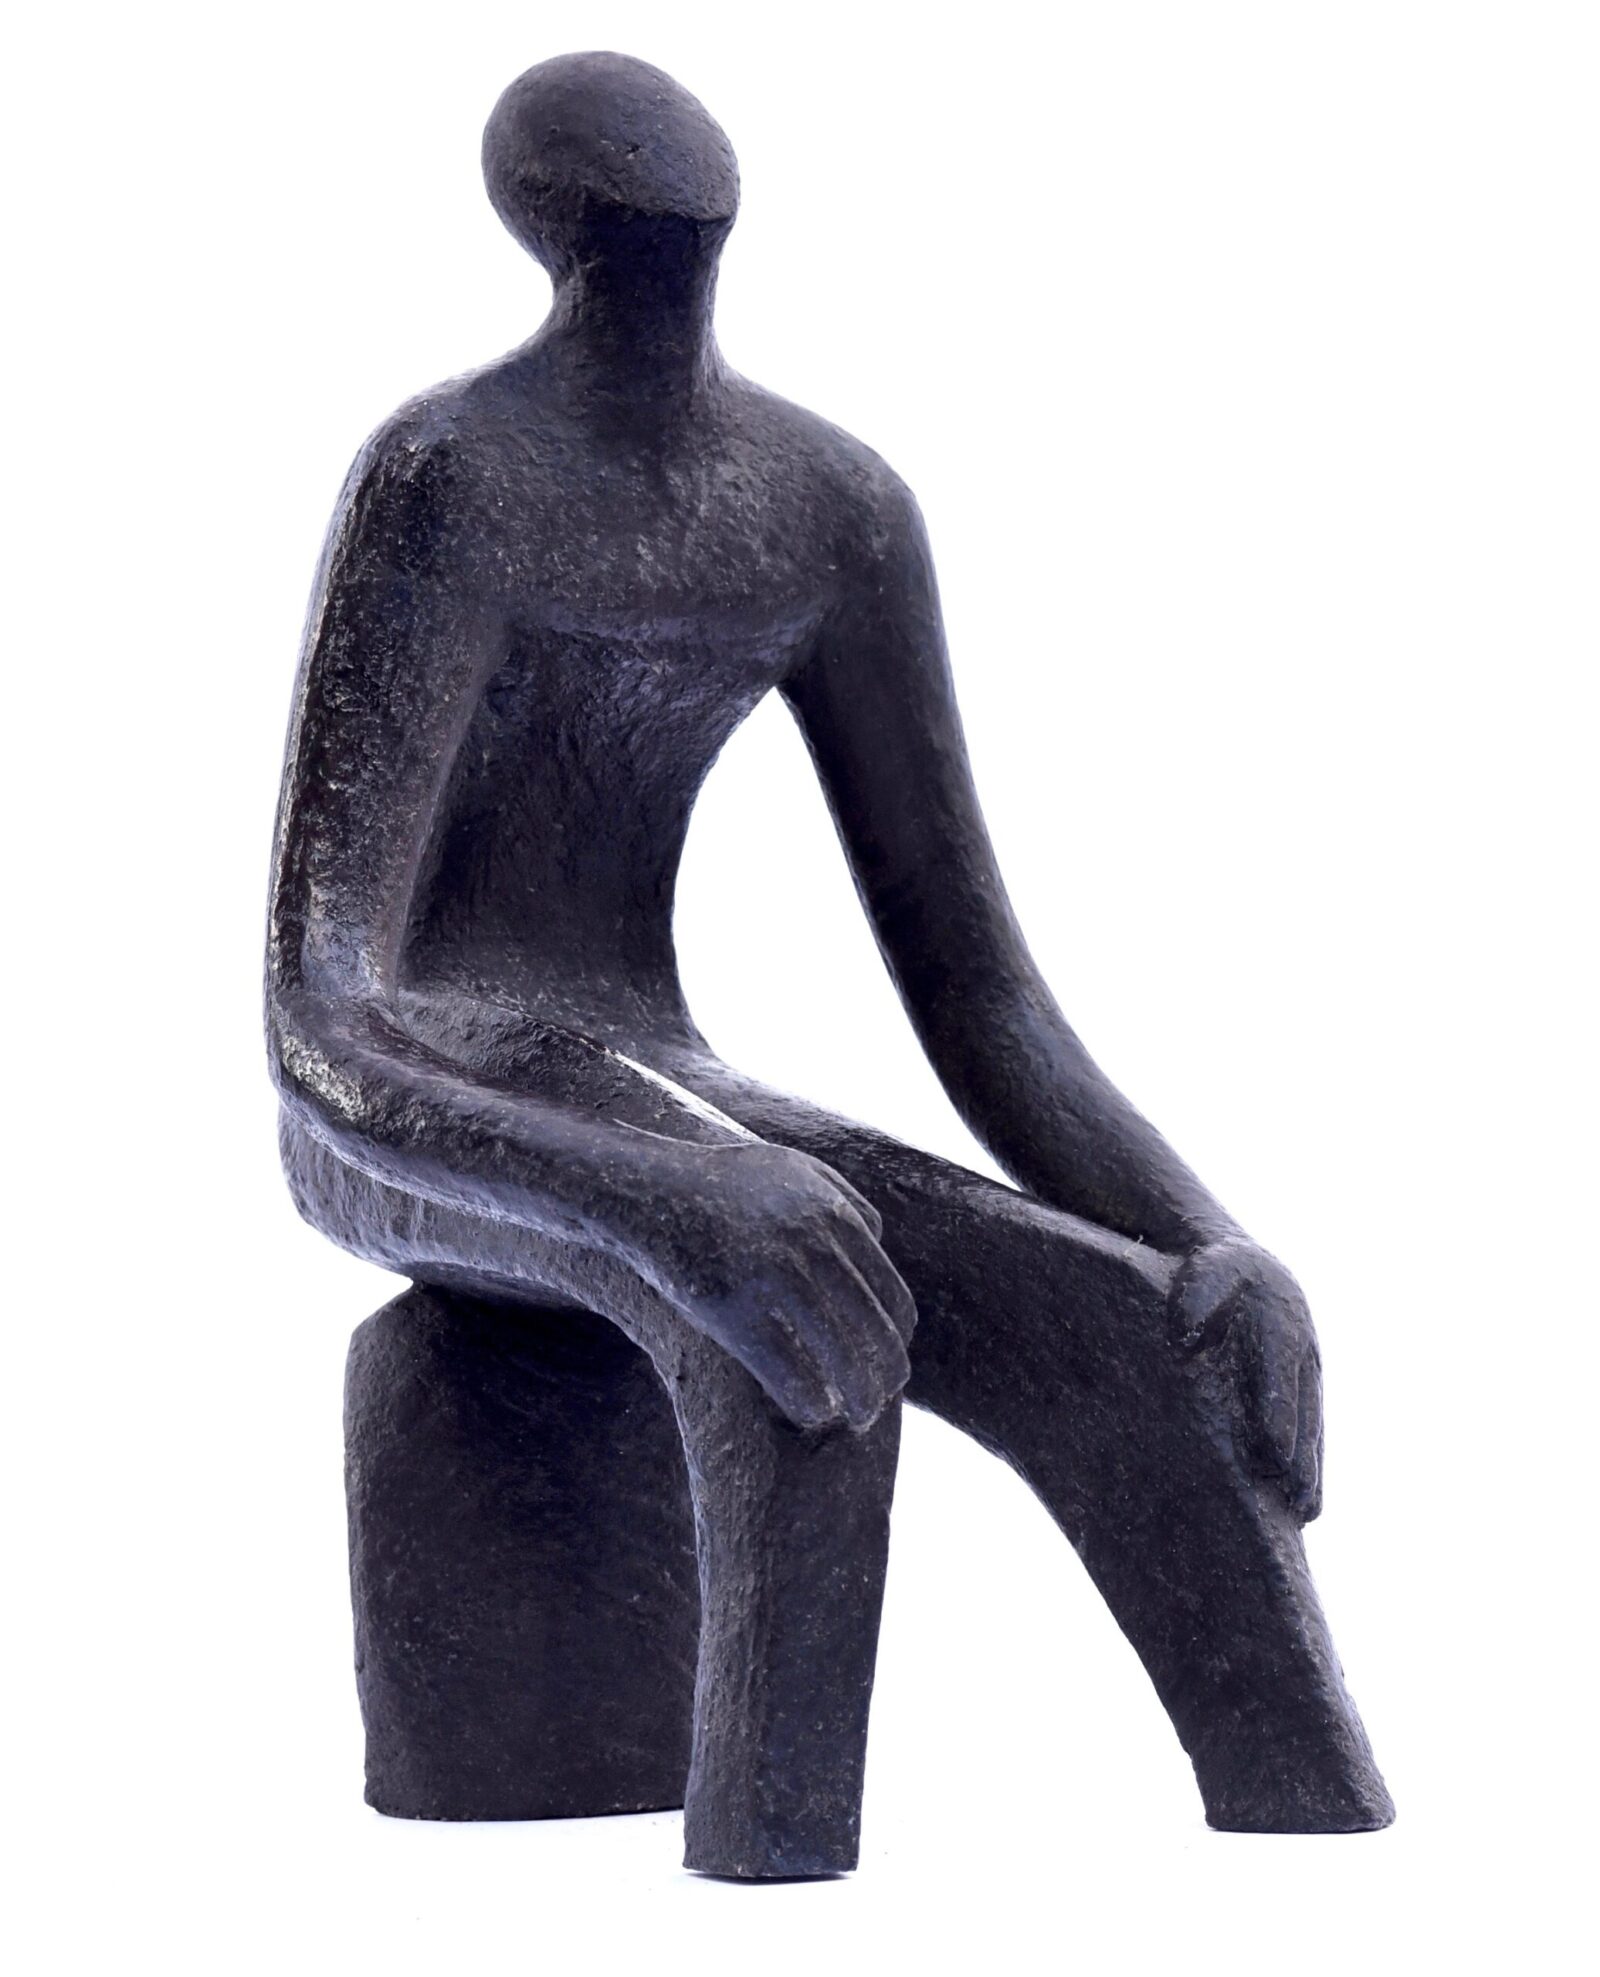 modern sculpture of a siting figure with flowing lines